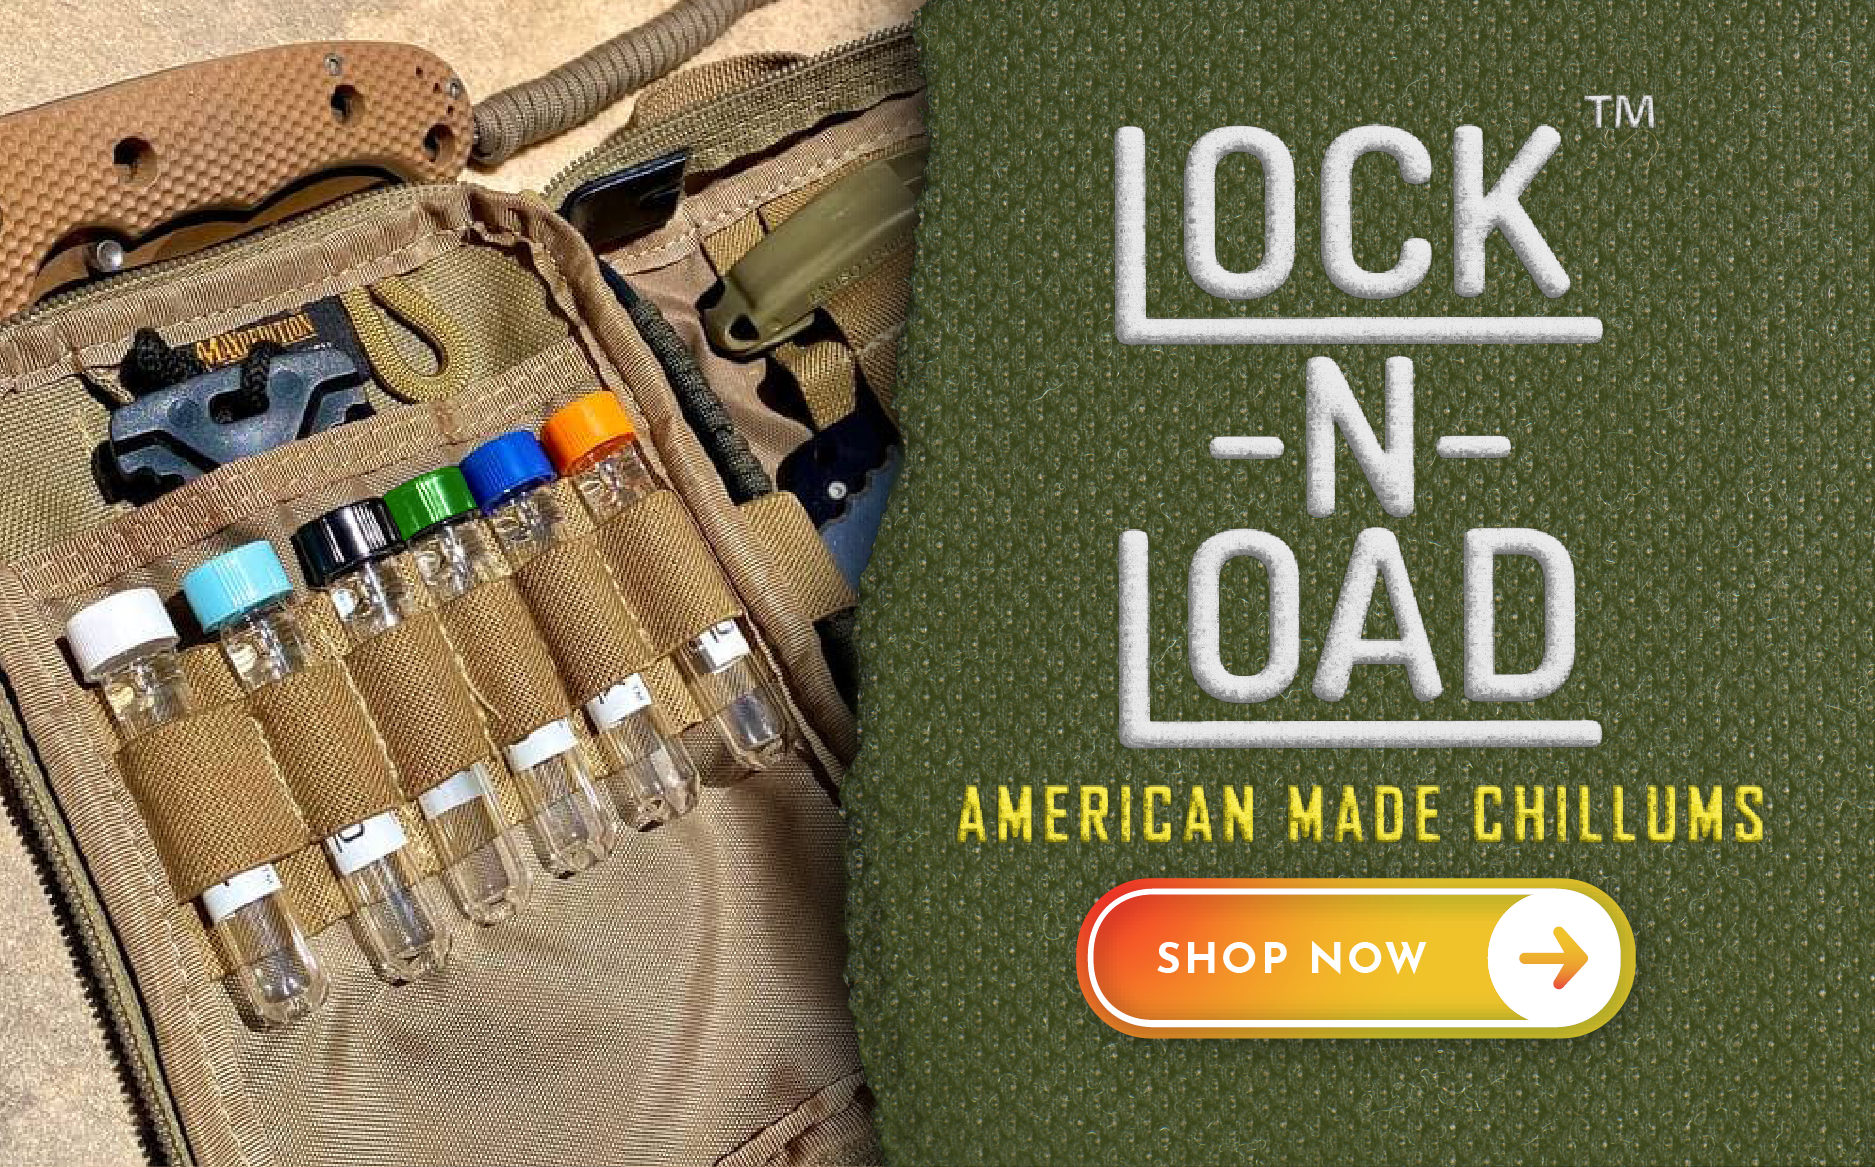 Lock N Load Chillums American Made Chillums Wholesale